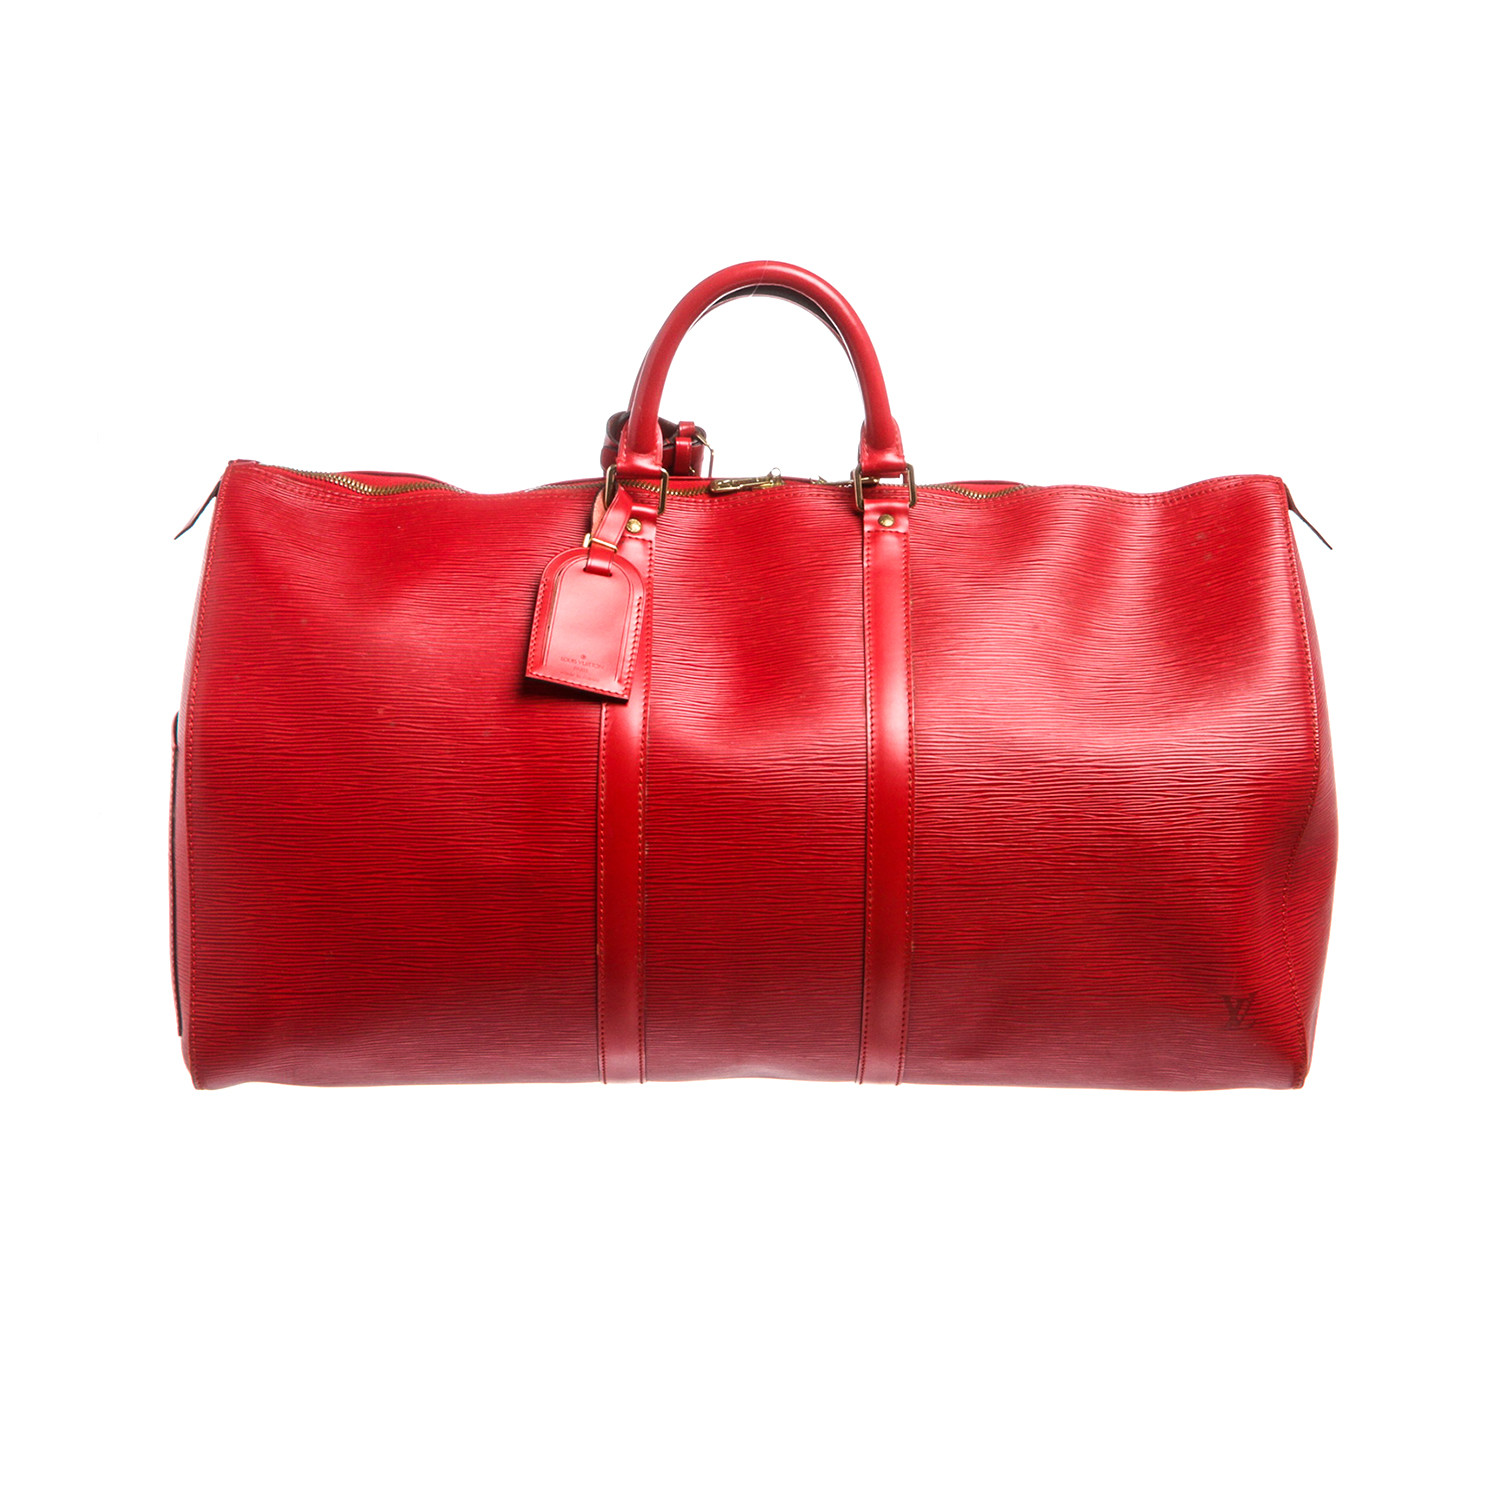 Louis Vuitton // Epi Leather Keepall Duffle Bag // Red // SP0947 // Pre-Owned - Louis Vuitton ...